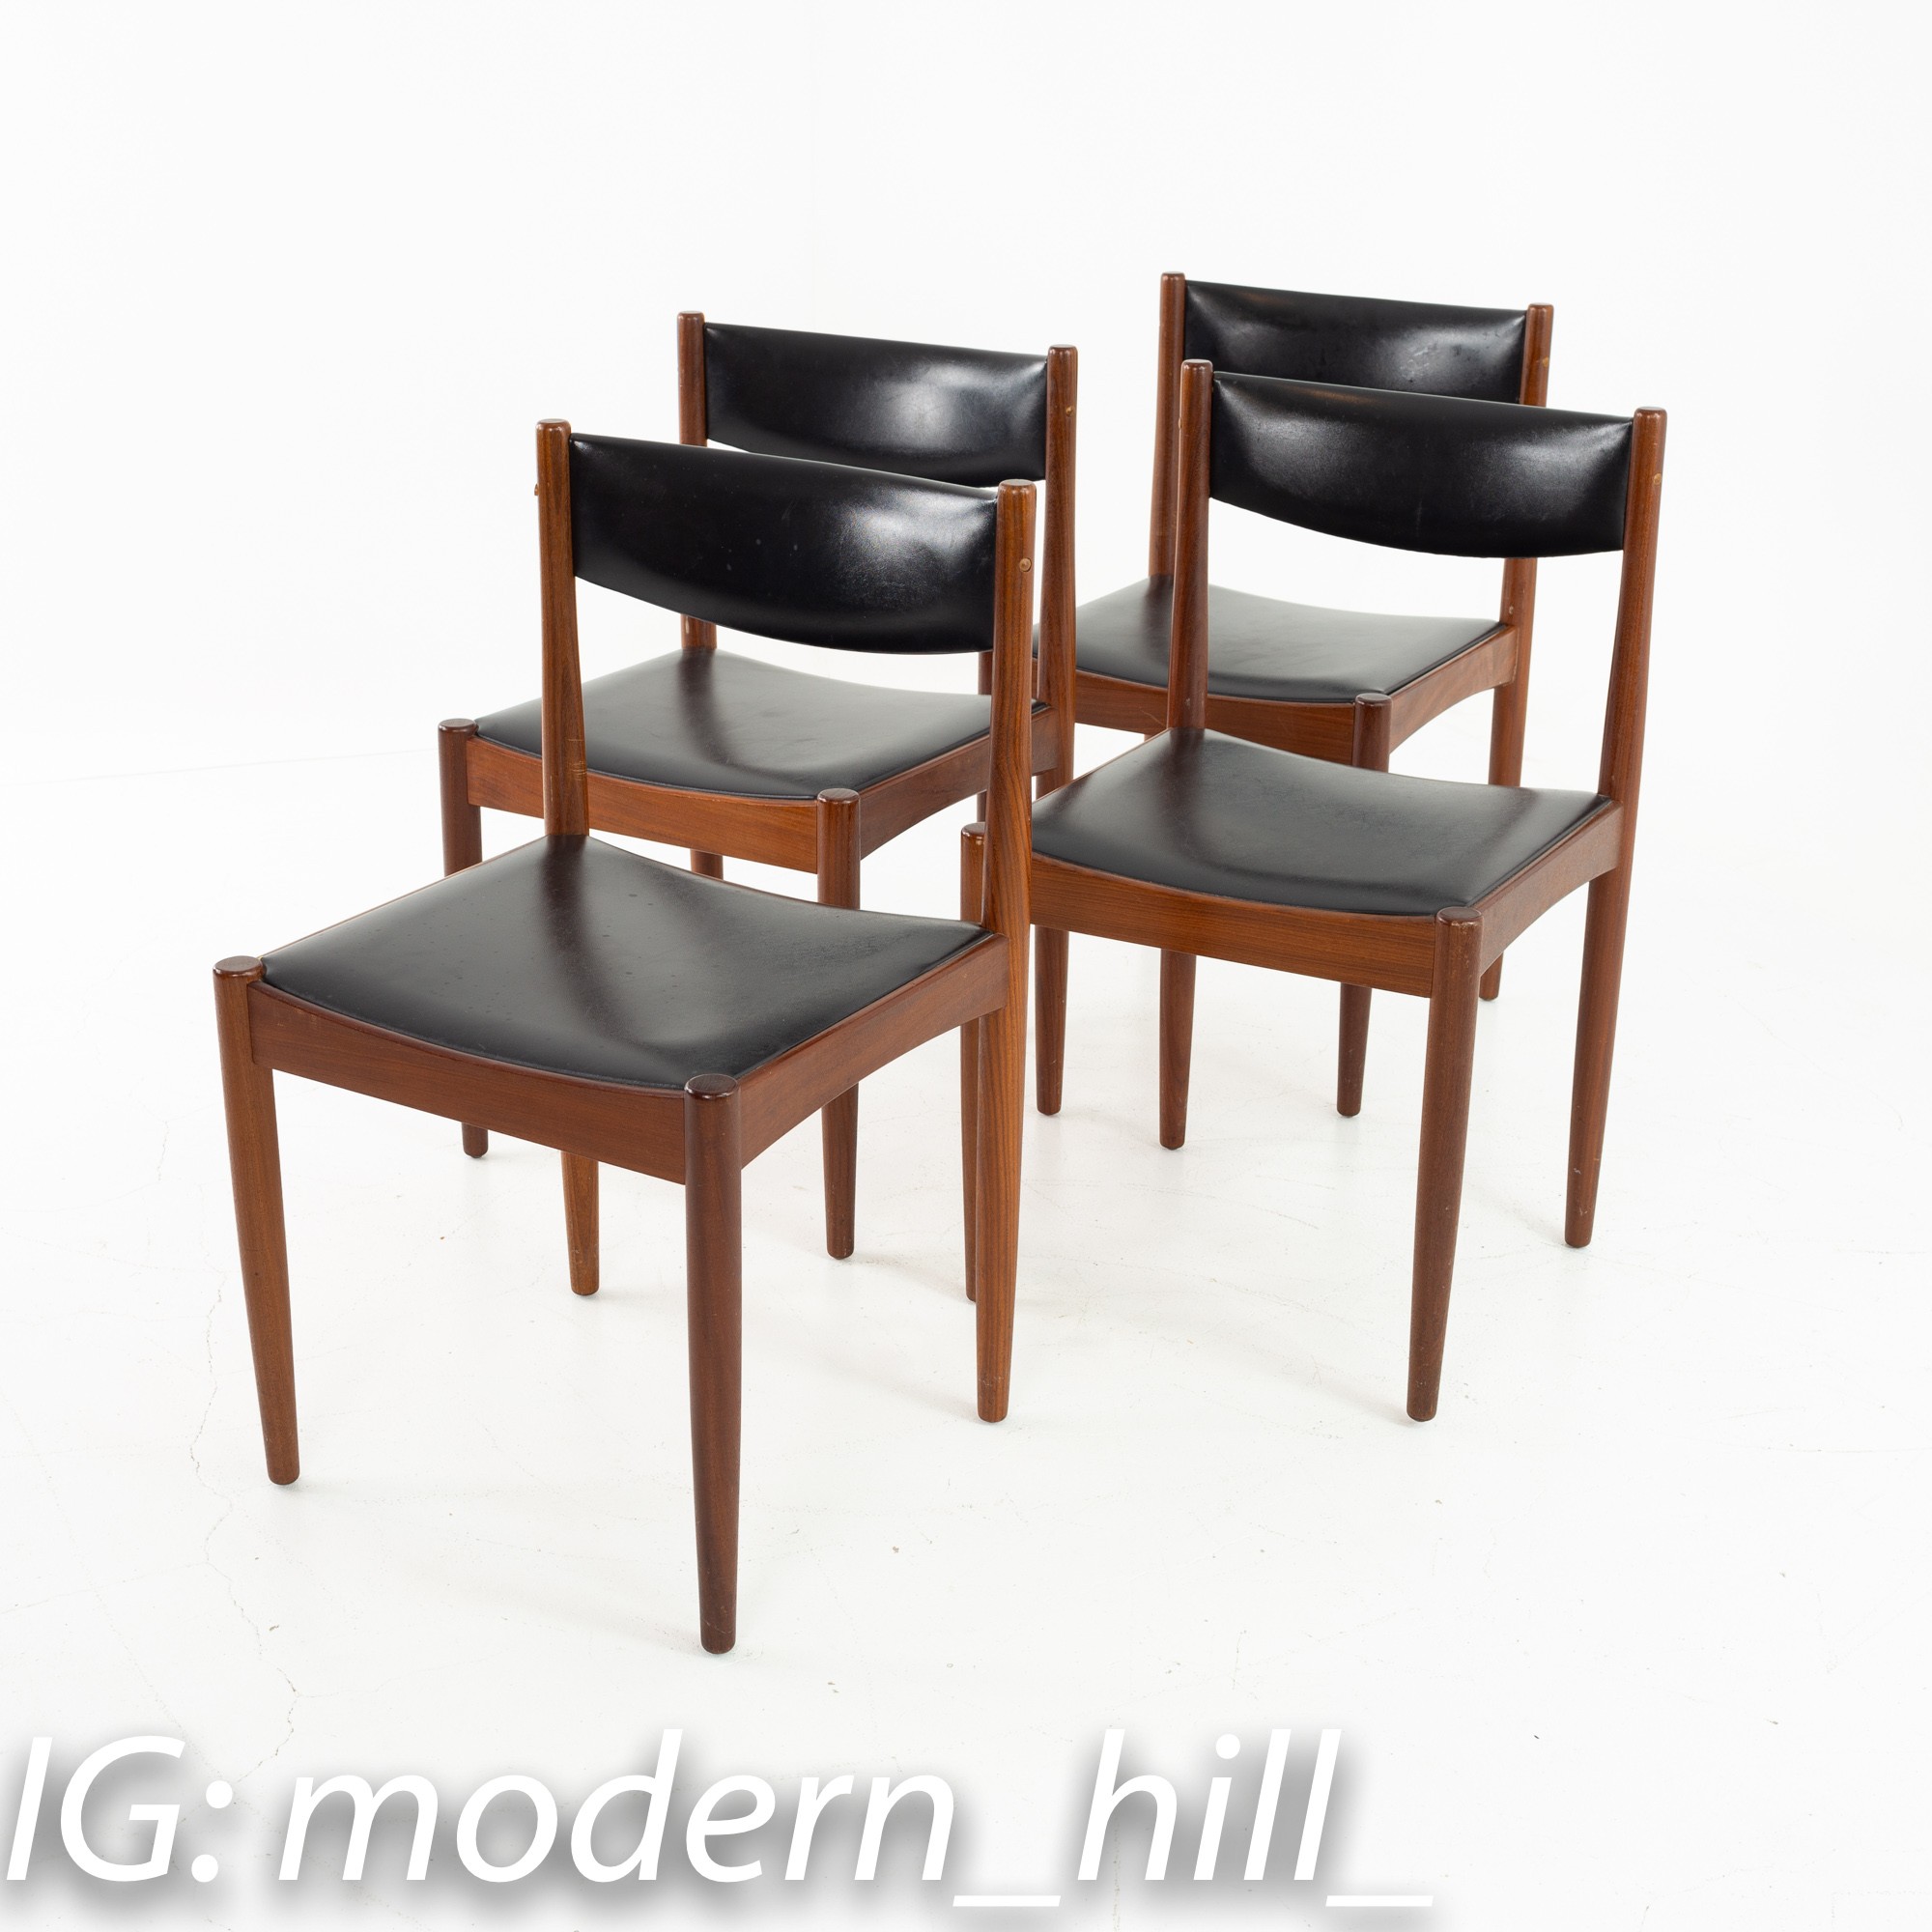 Mid Century Danish Furniture Makers Control Walnut Dining Chairs - Set of 6